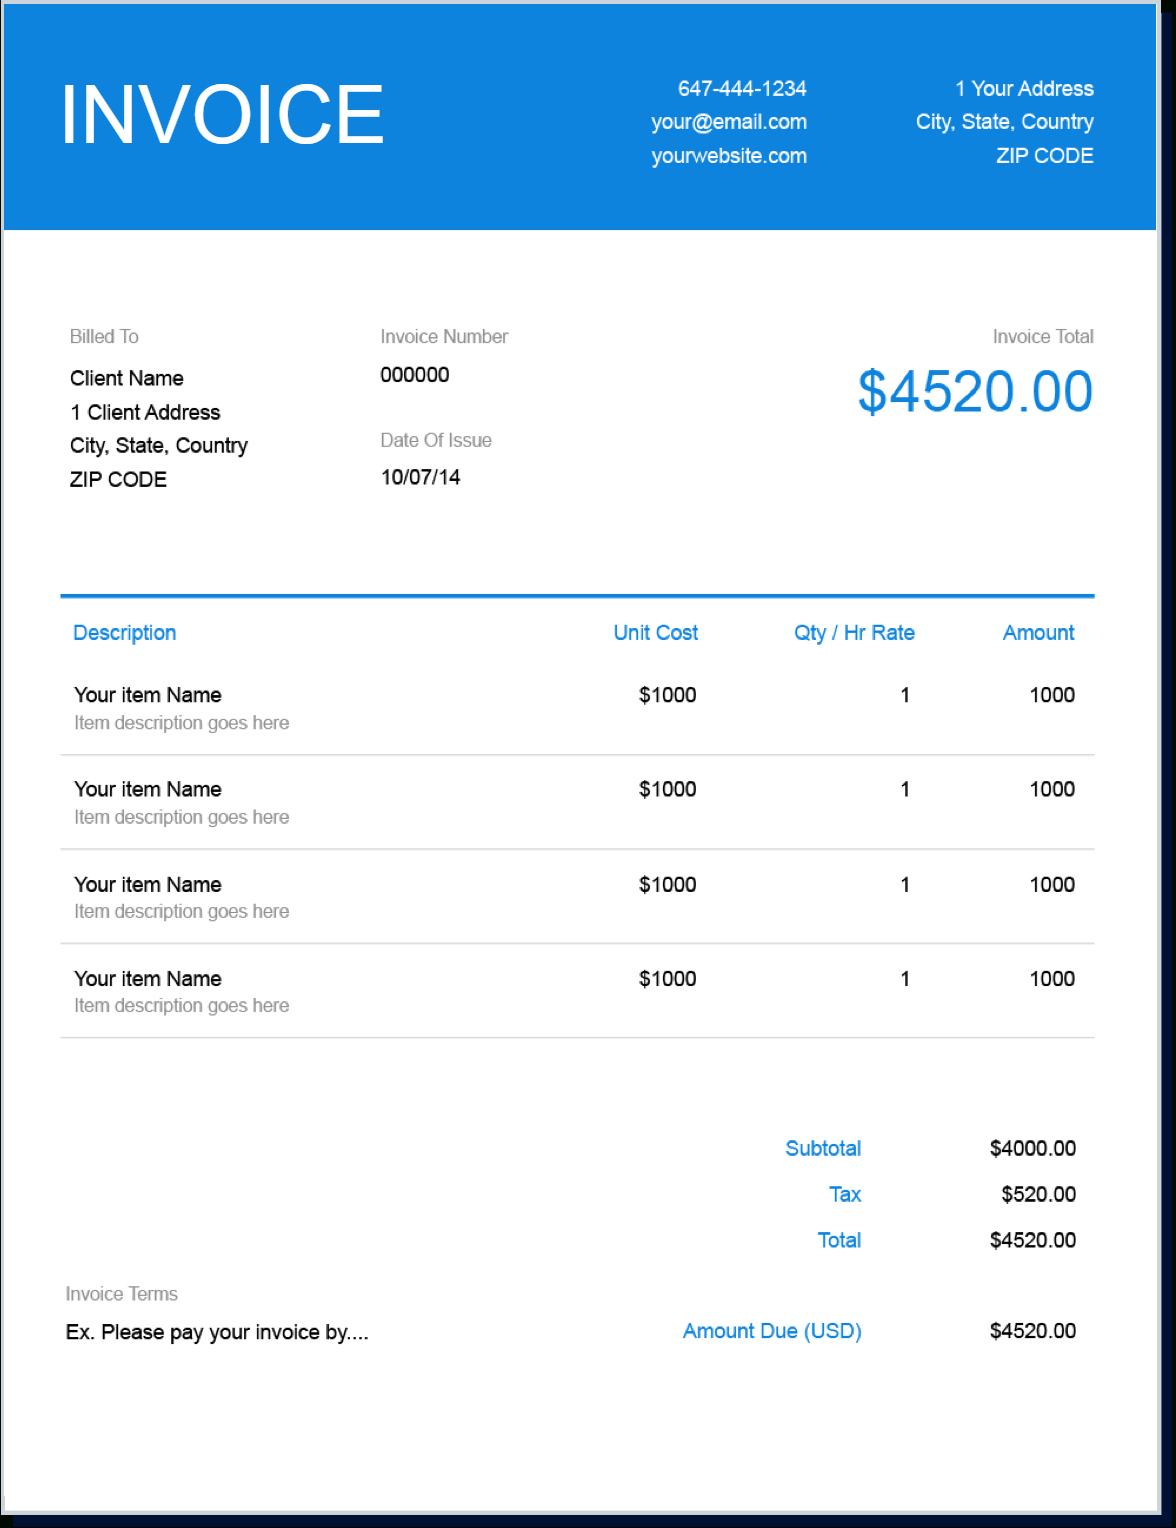 Invoice Template | Create And Send Free Invoices Instantly Intended For Mobile Phone Invoice Template